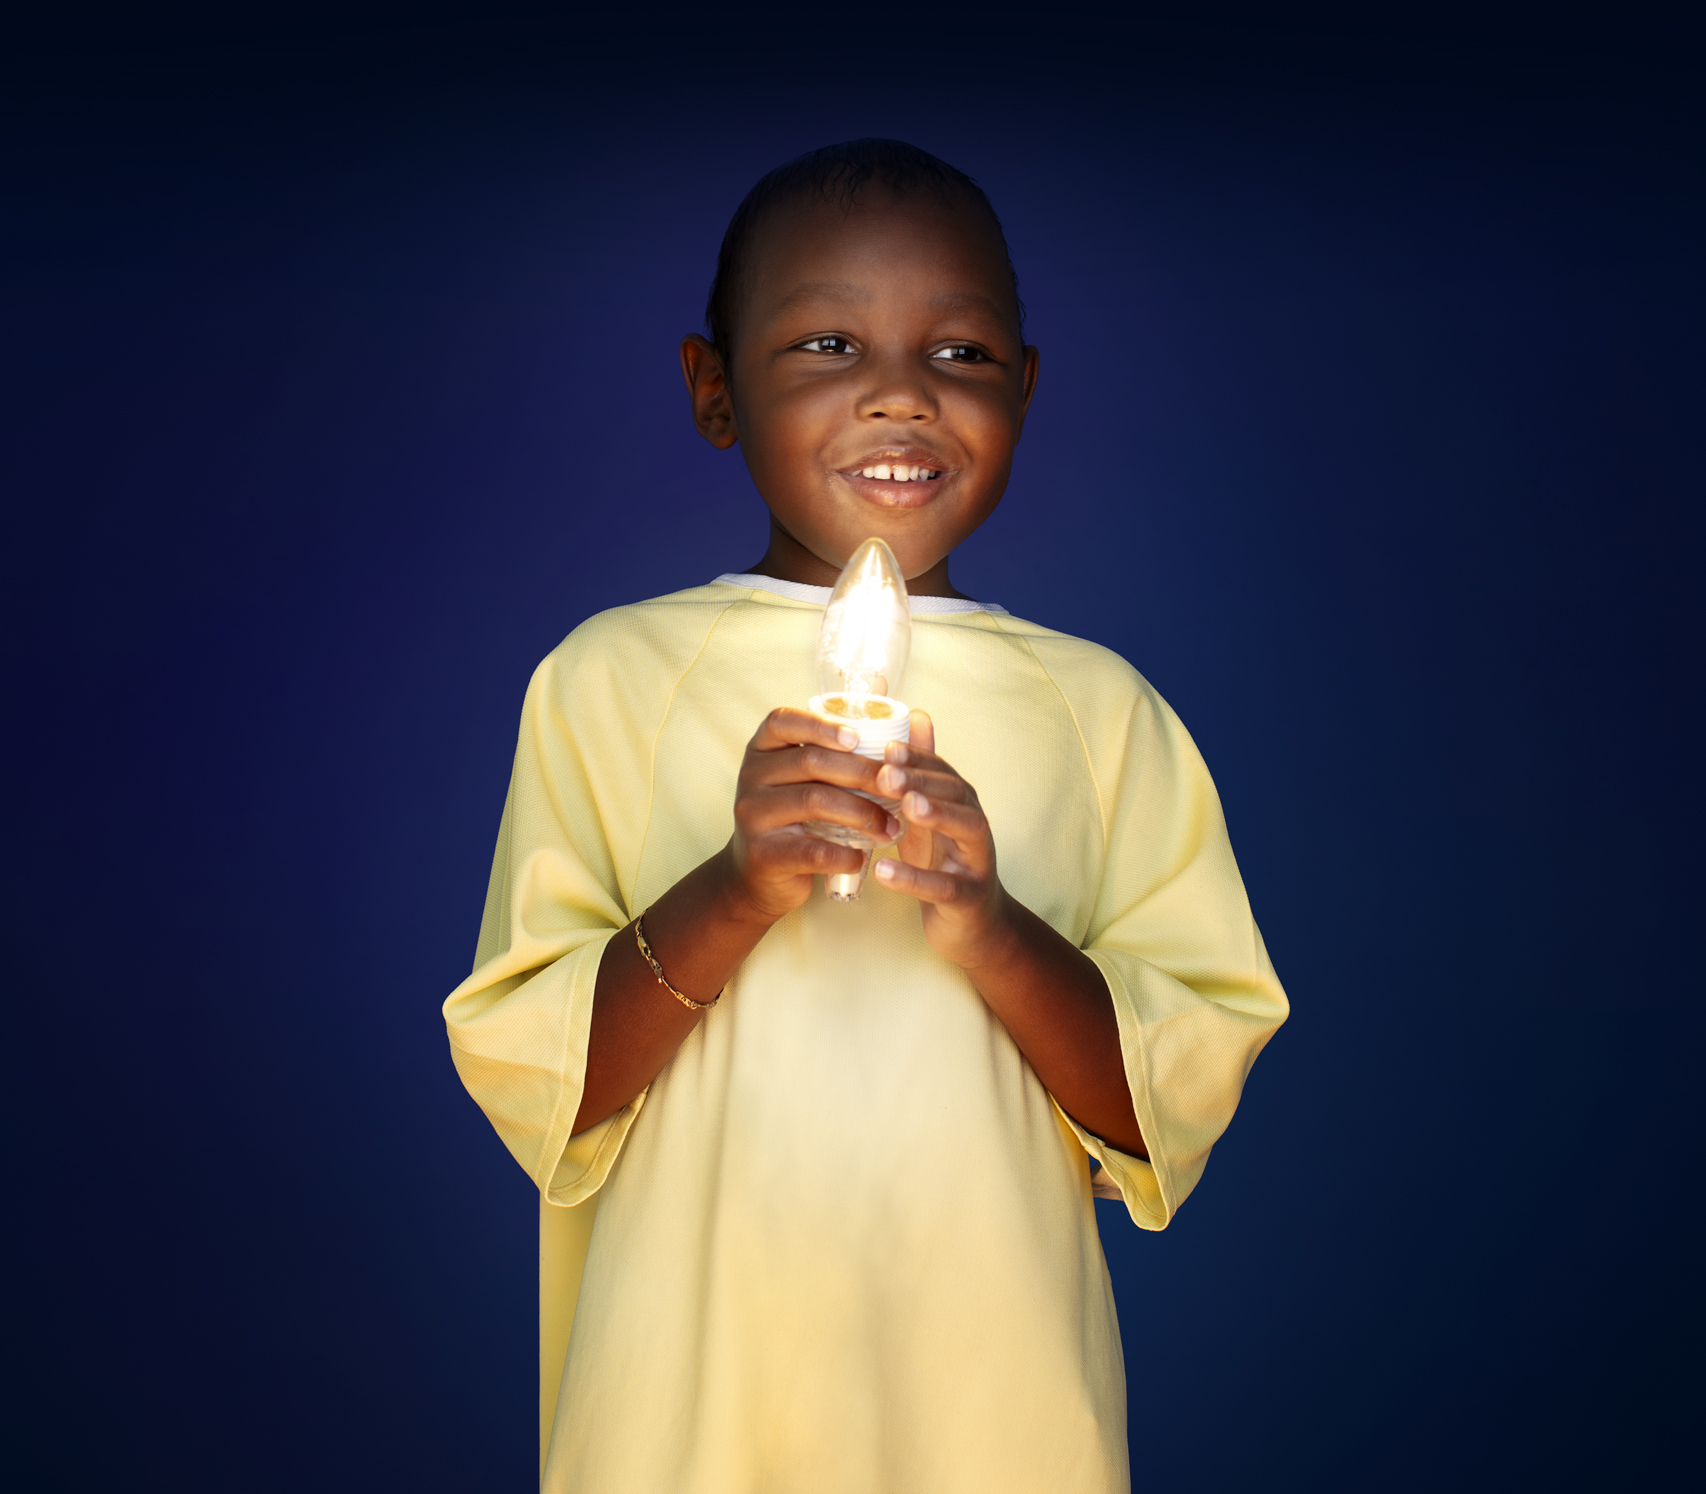 Five-year-old Eli-Noah, dressed in a yellow hospital gown, holds up a glowing candle-shaped light in his hands.